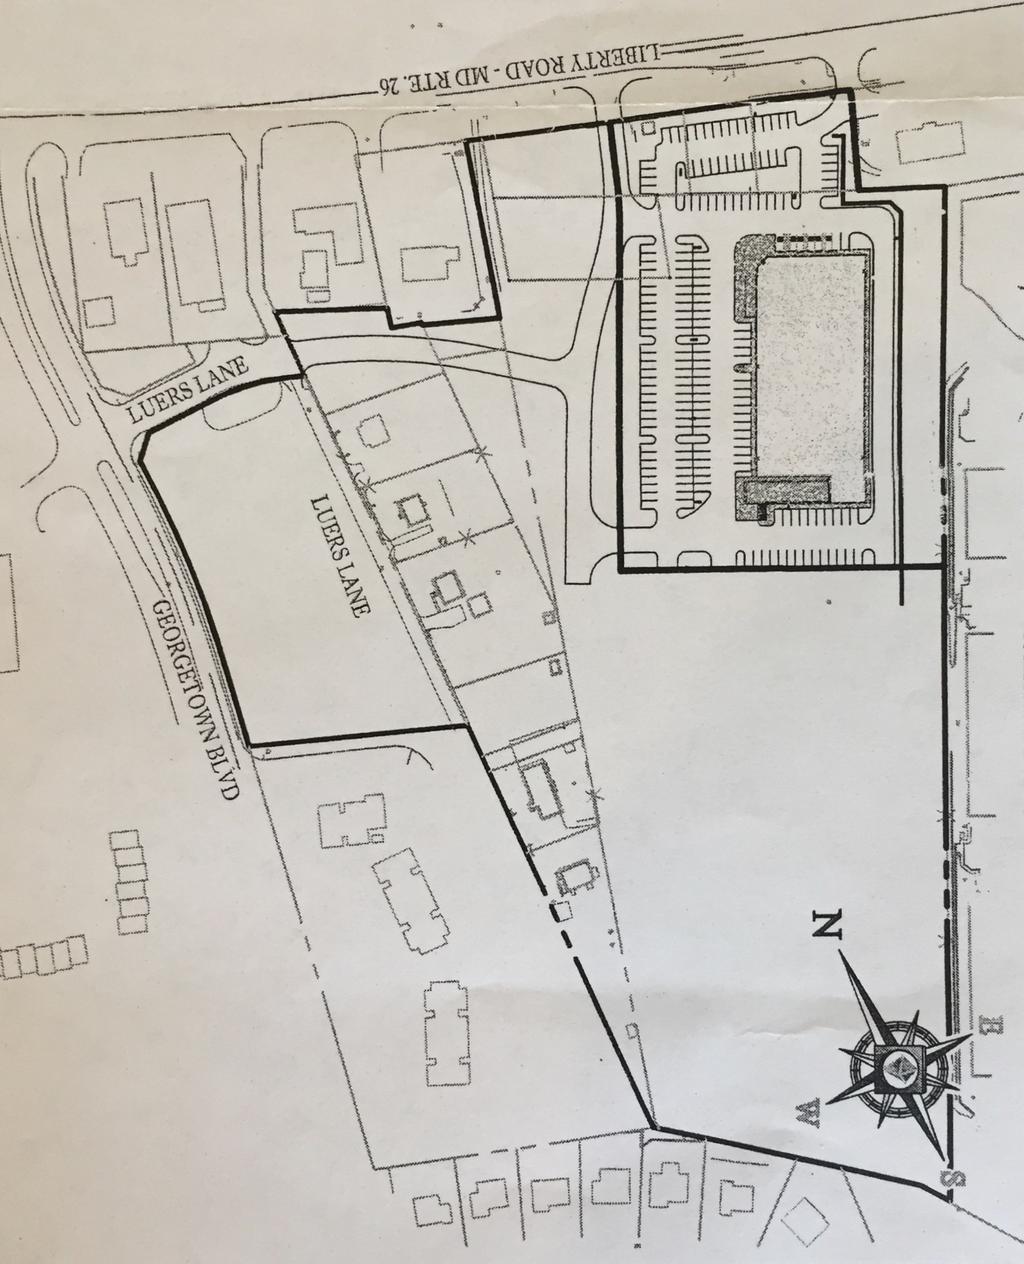 Reasons For Rejecting The LIDL Site Plan March 29, 2017 Background - On Wednesday, April 5, the Carroll County Planning and Zoning Commission is meeting to hear, among the various matters on its